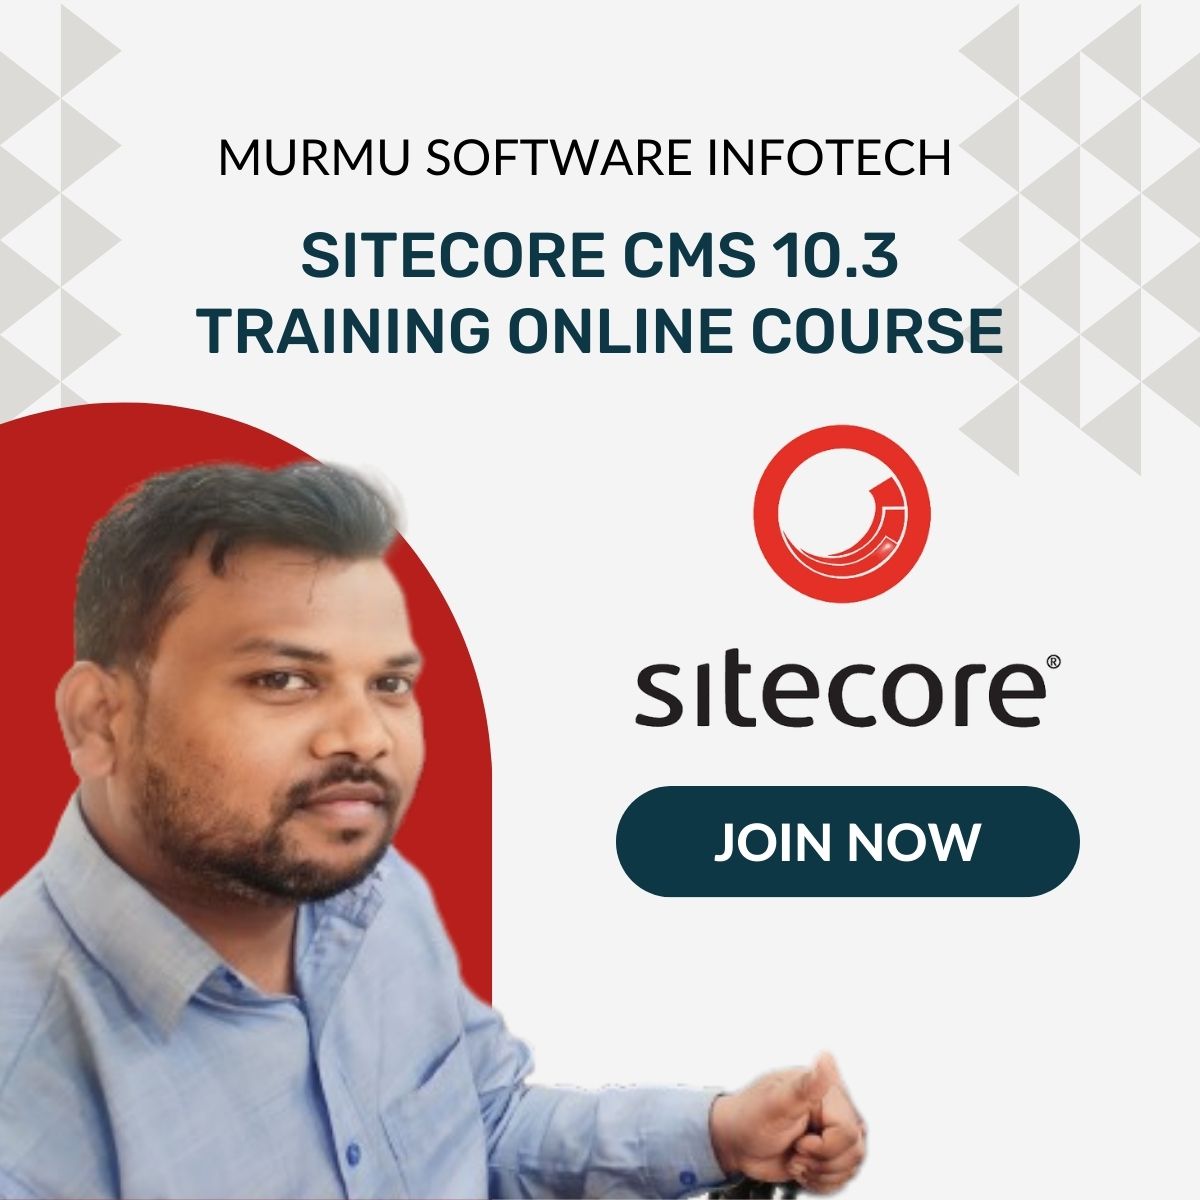 Sitecore Training Online and Certification Course